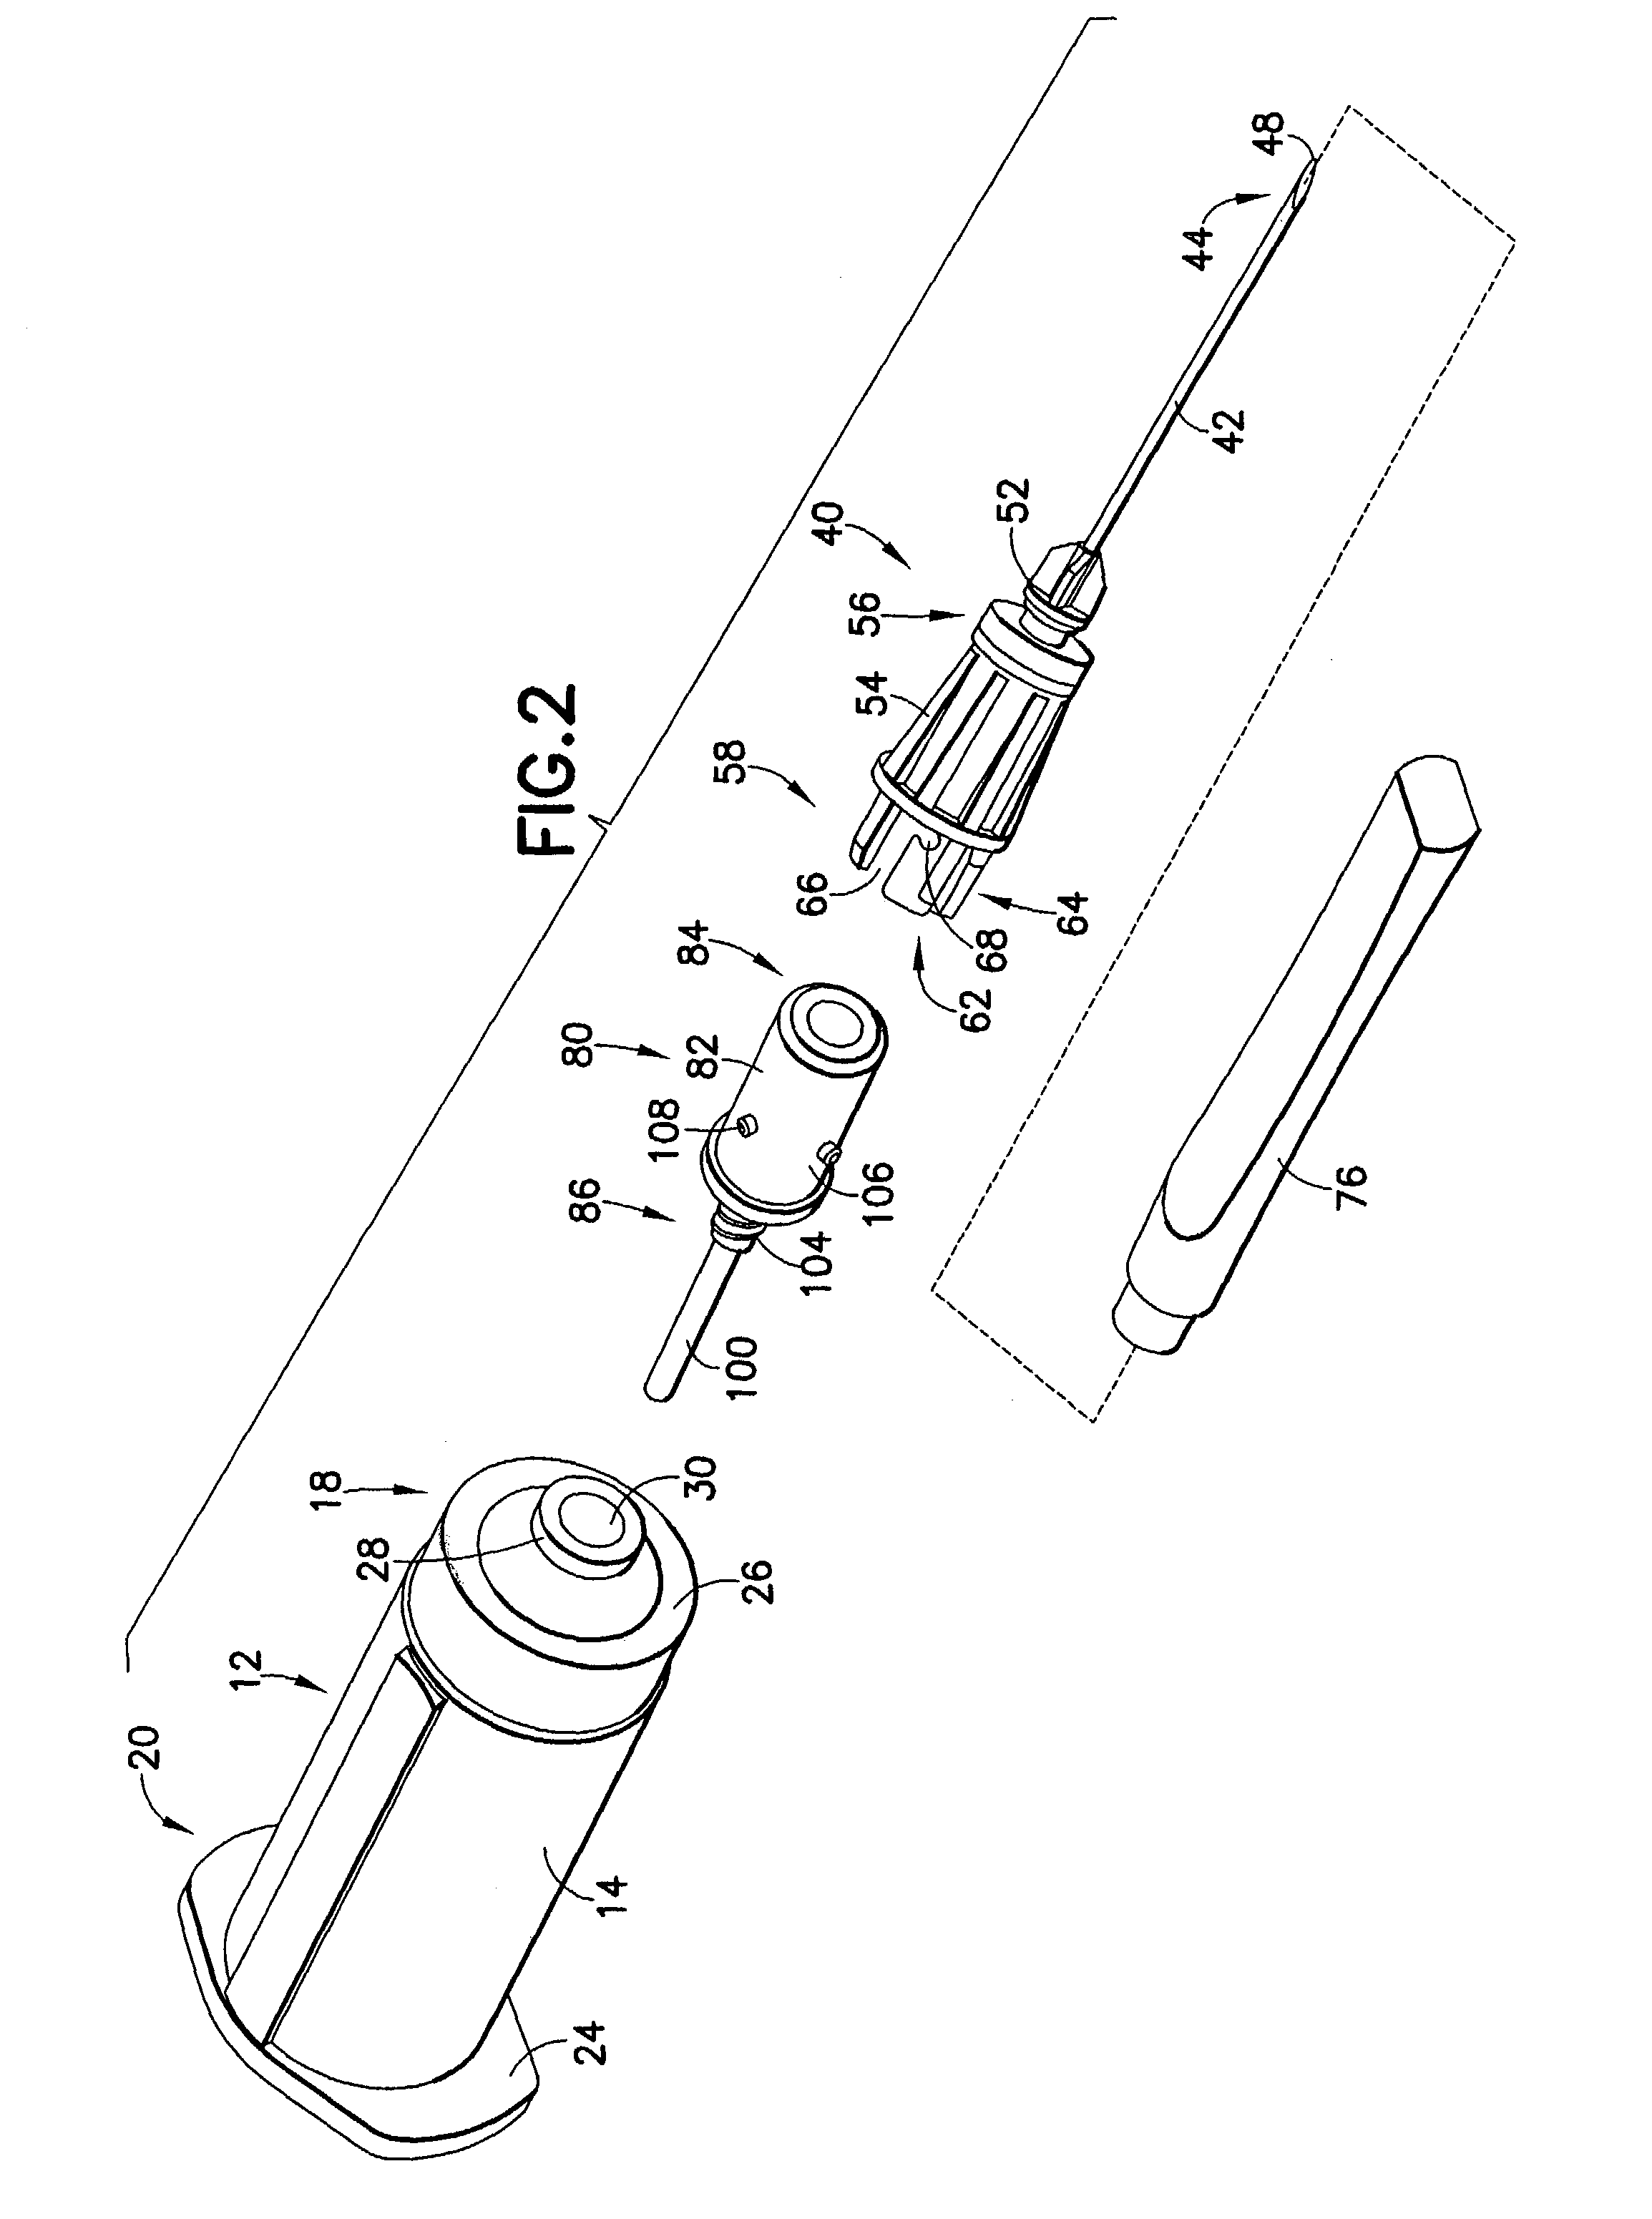 Coupling device for blood collection assembly